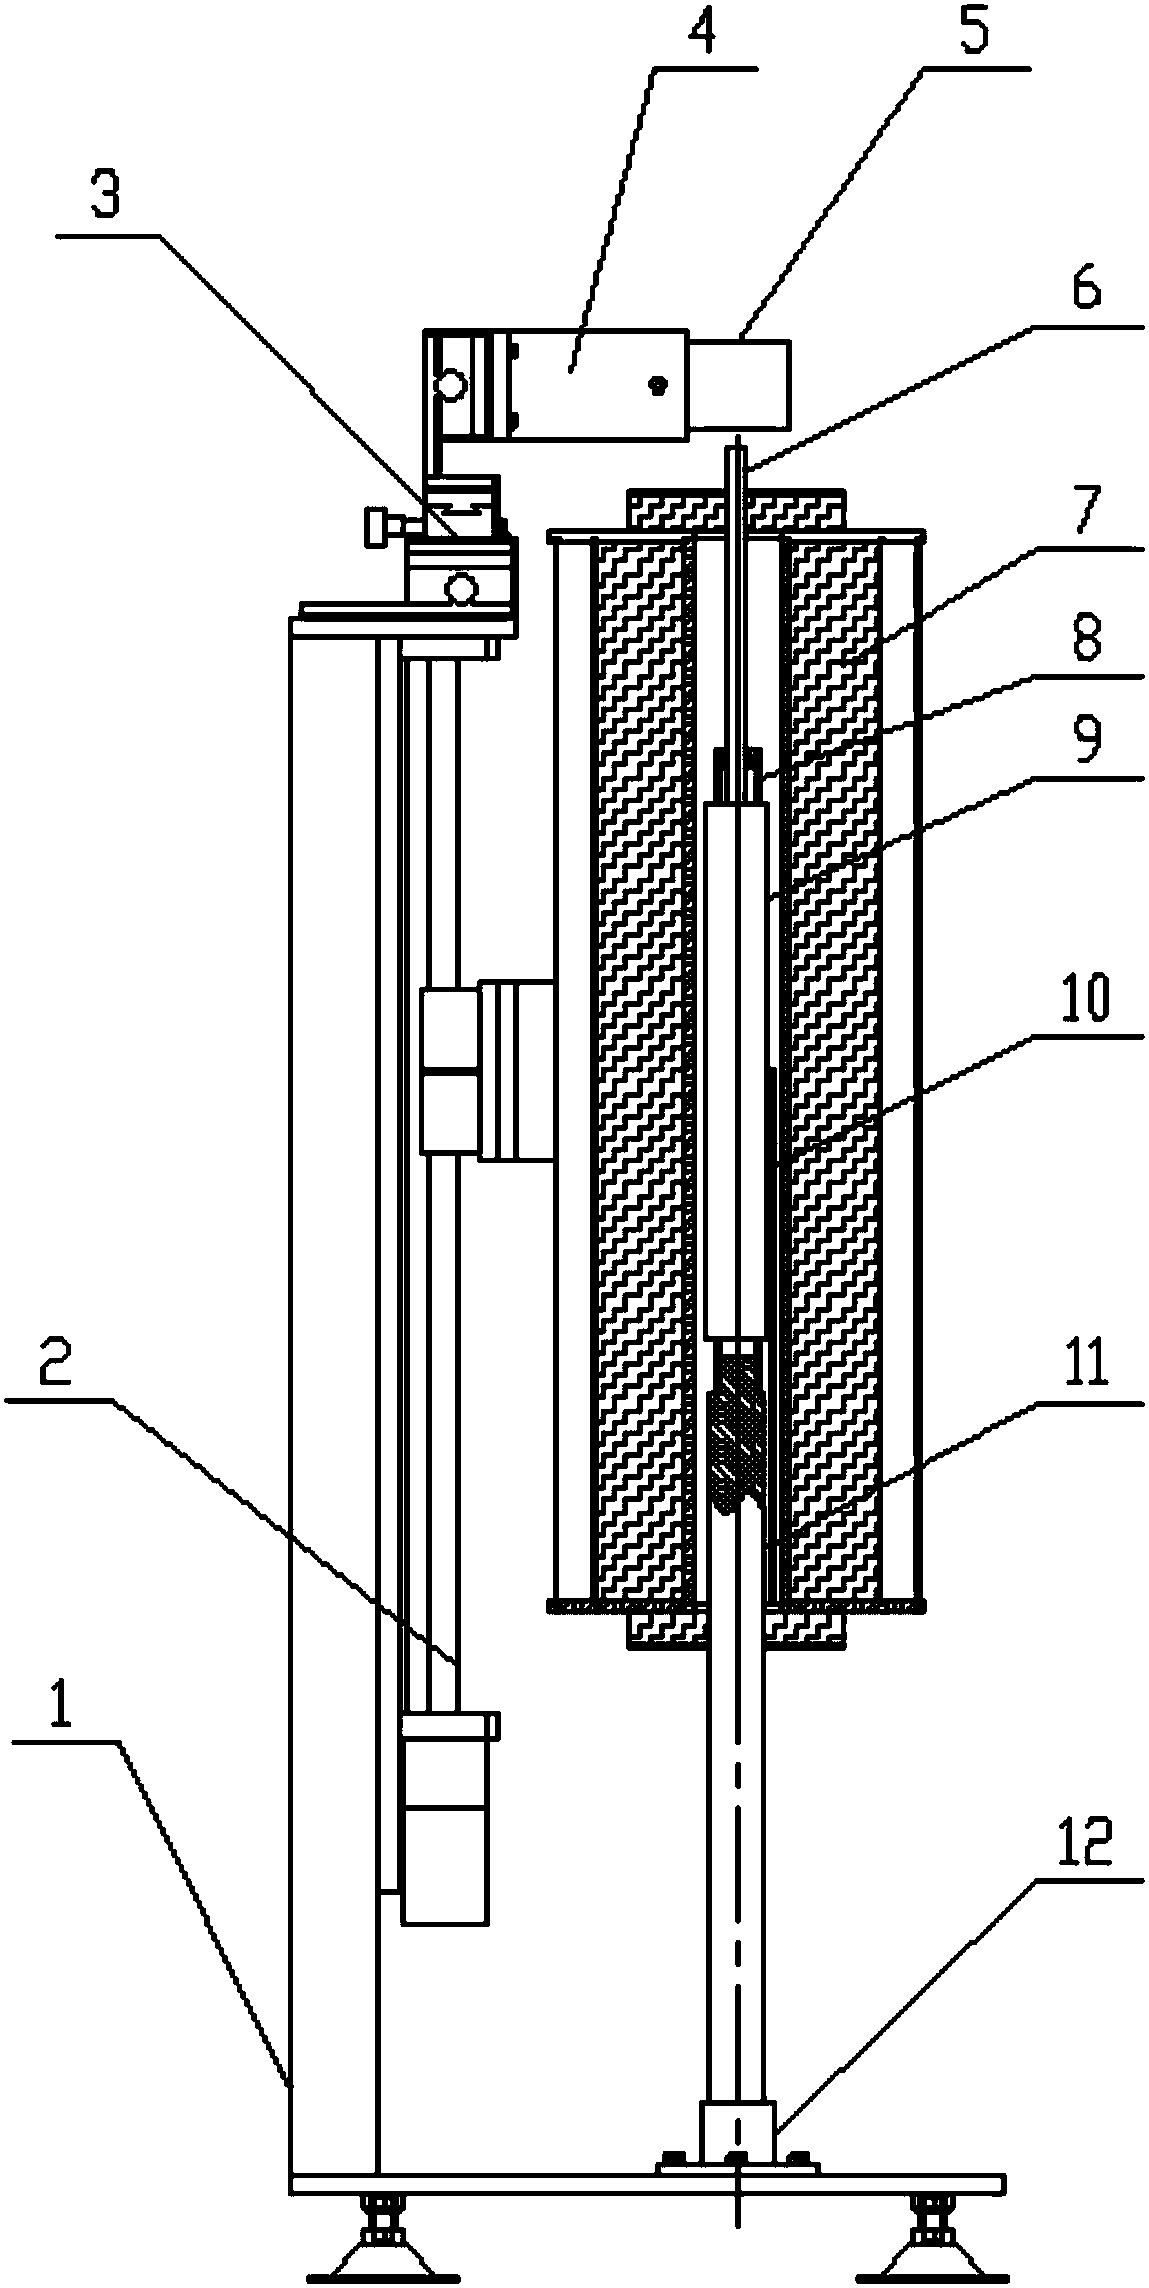 Device and method for measuring reheating linear shrinkage ratio of ultra-thin glass through laser method